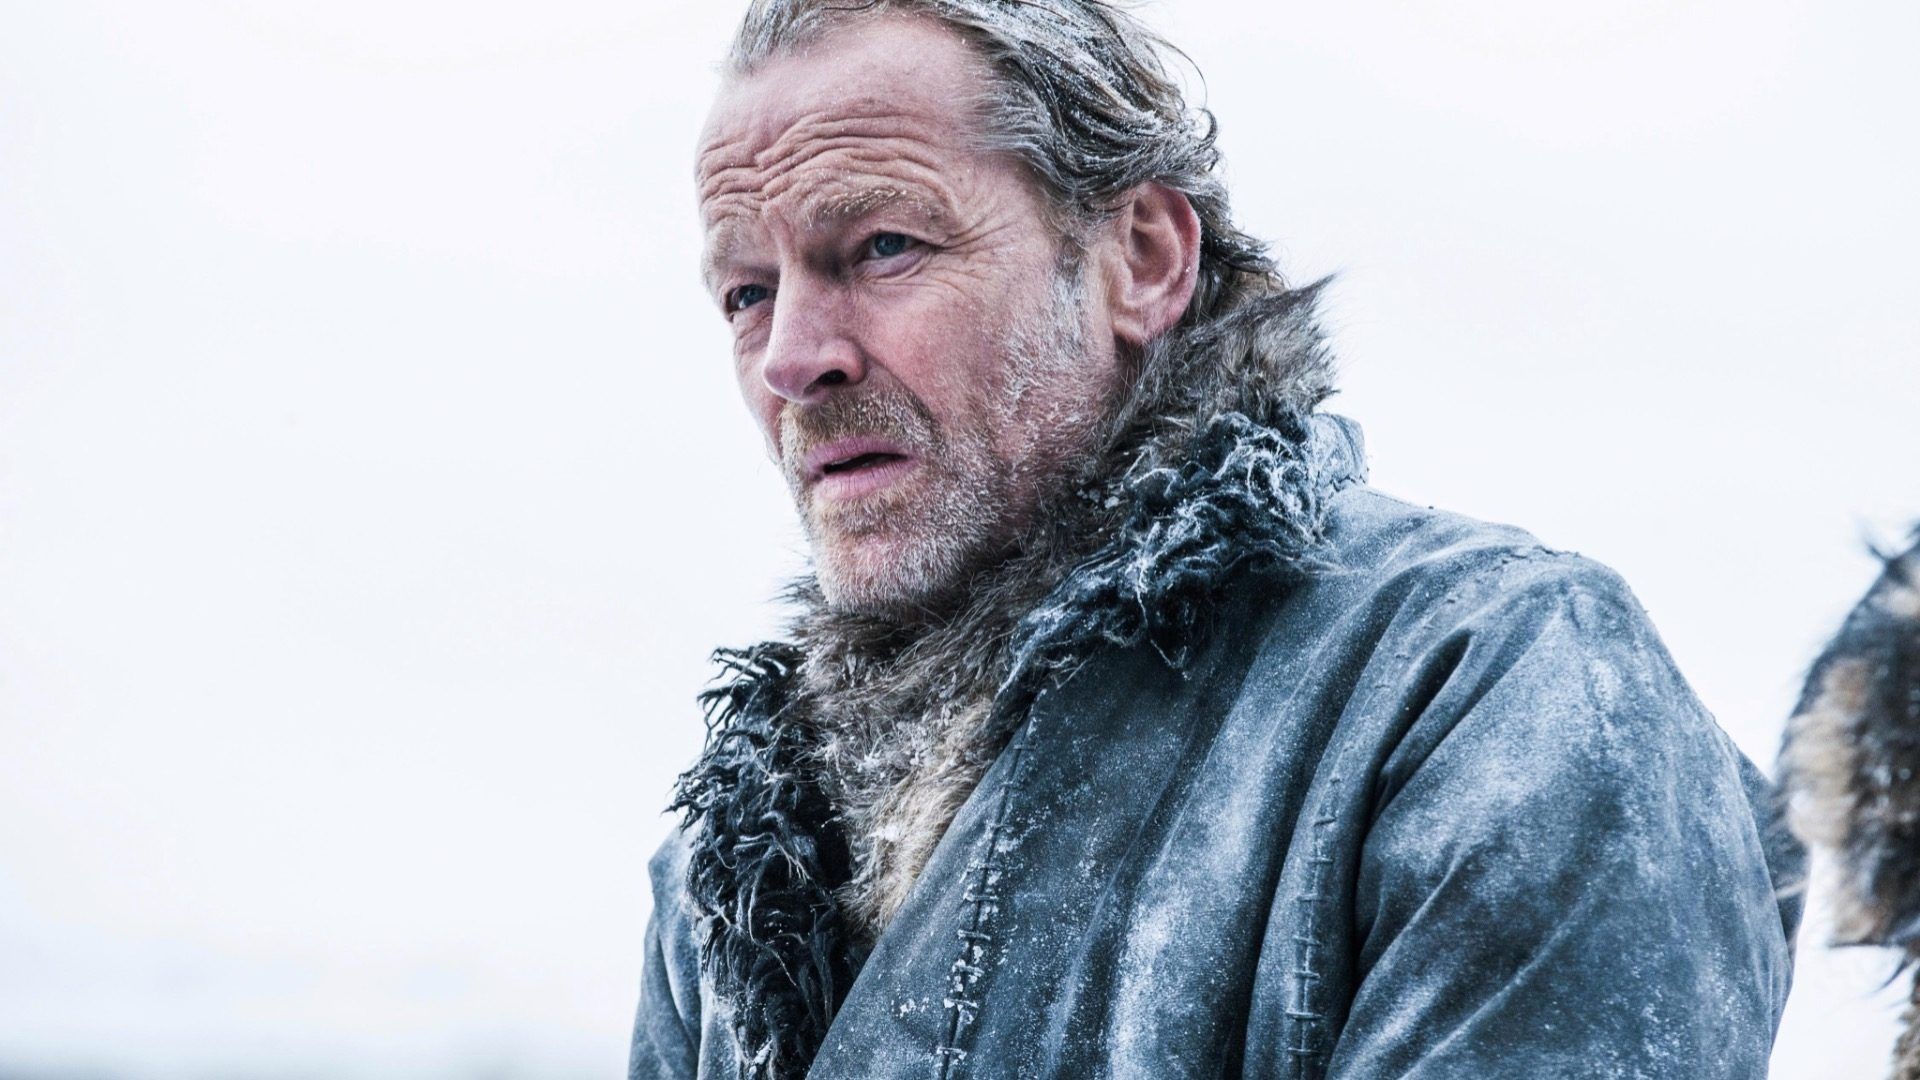 Titans Finds Its Bruce Wayne with Game of Thrones' Iain Glen